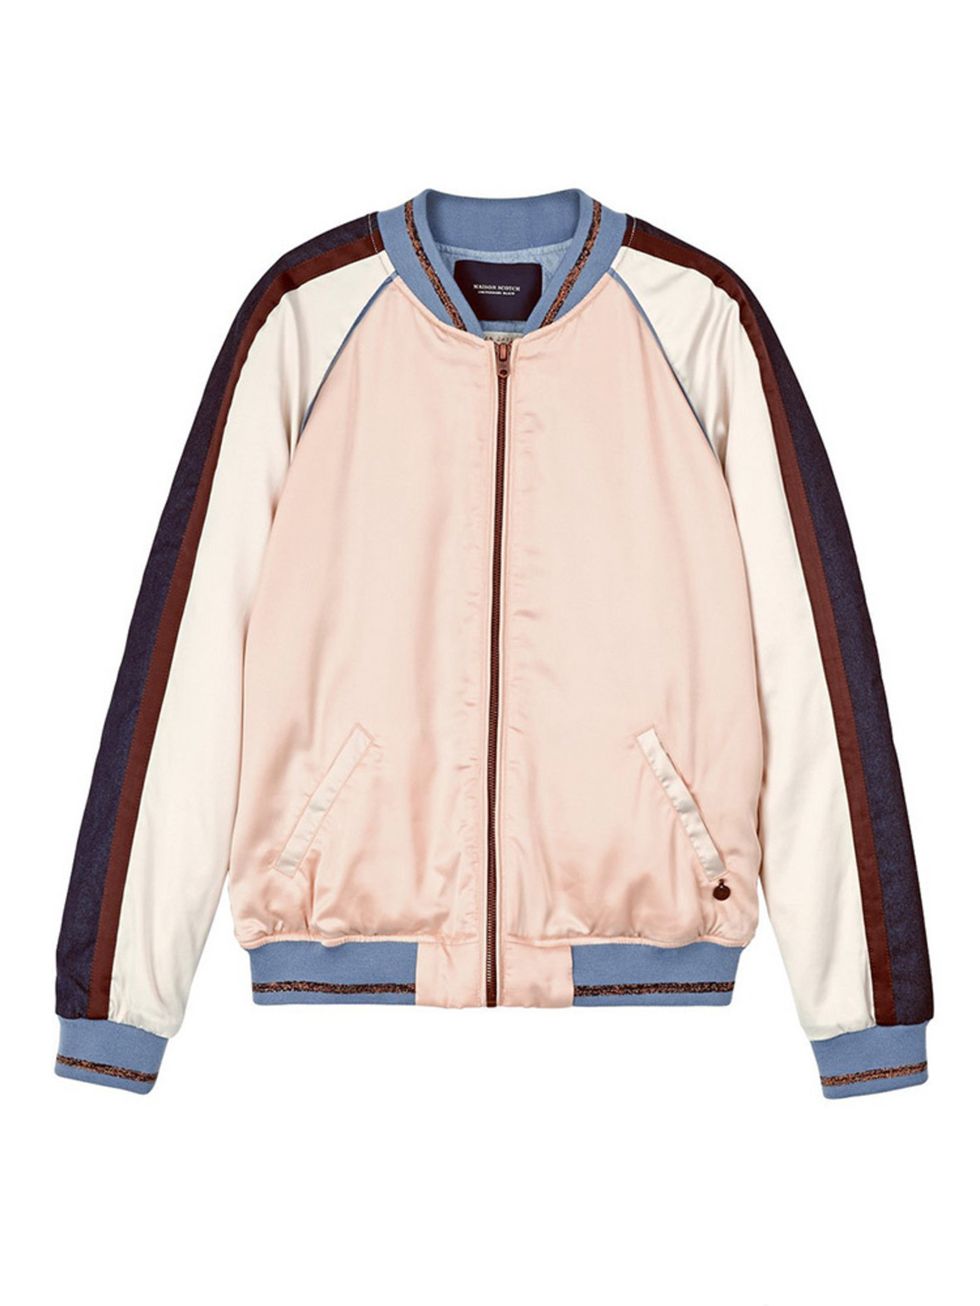 <p>£185, Maison Scotch at <a href="http://www.veryexclusive.co.uk/maison-scotch-fringe-detail-bomber-jacket-pink/1600047551.prd" target="_blank">Very Exclusive</a></p>